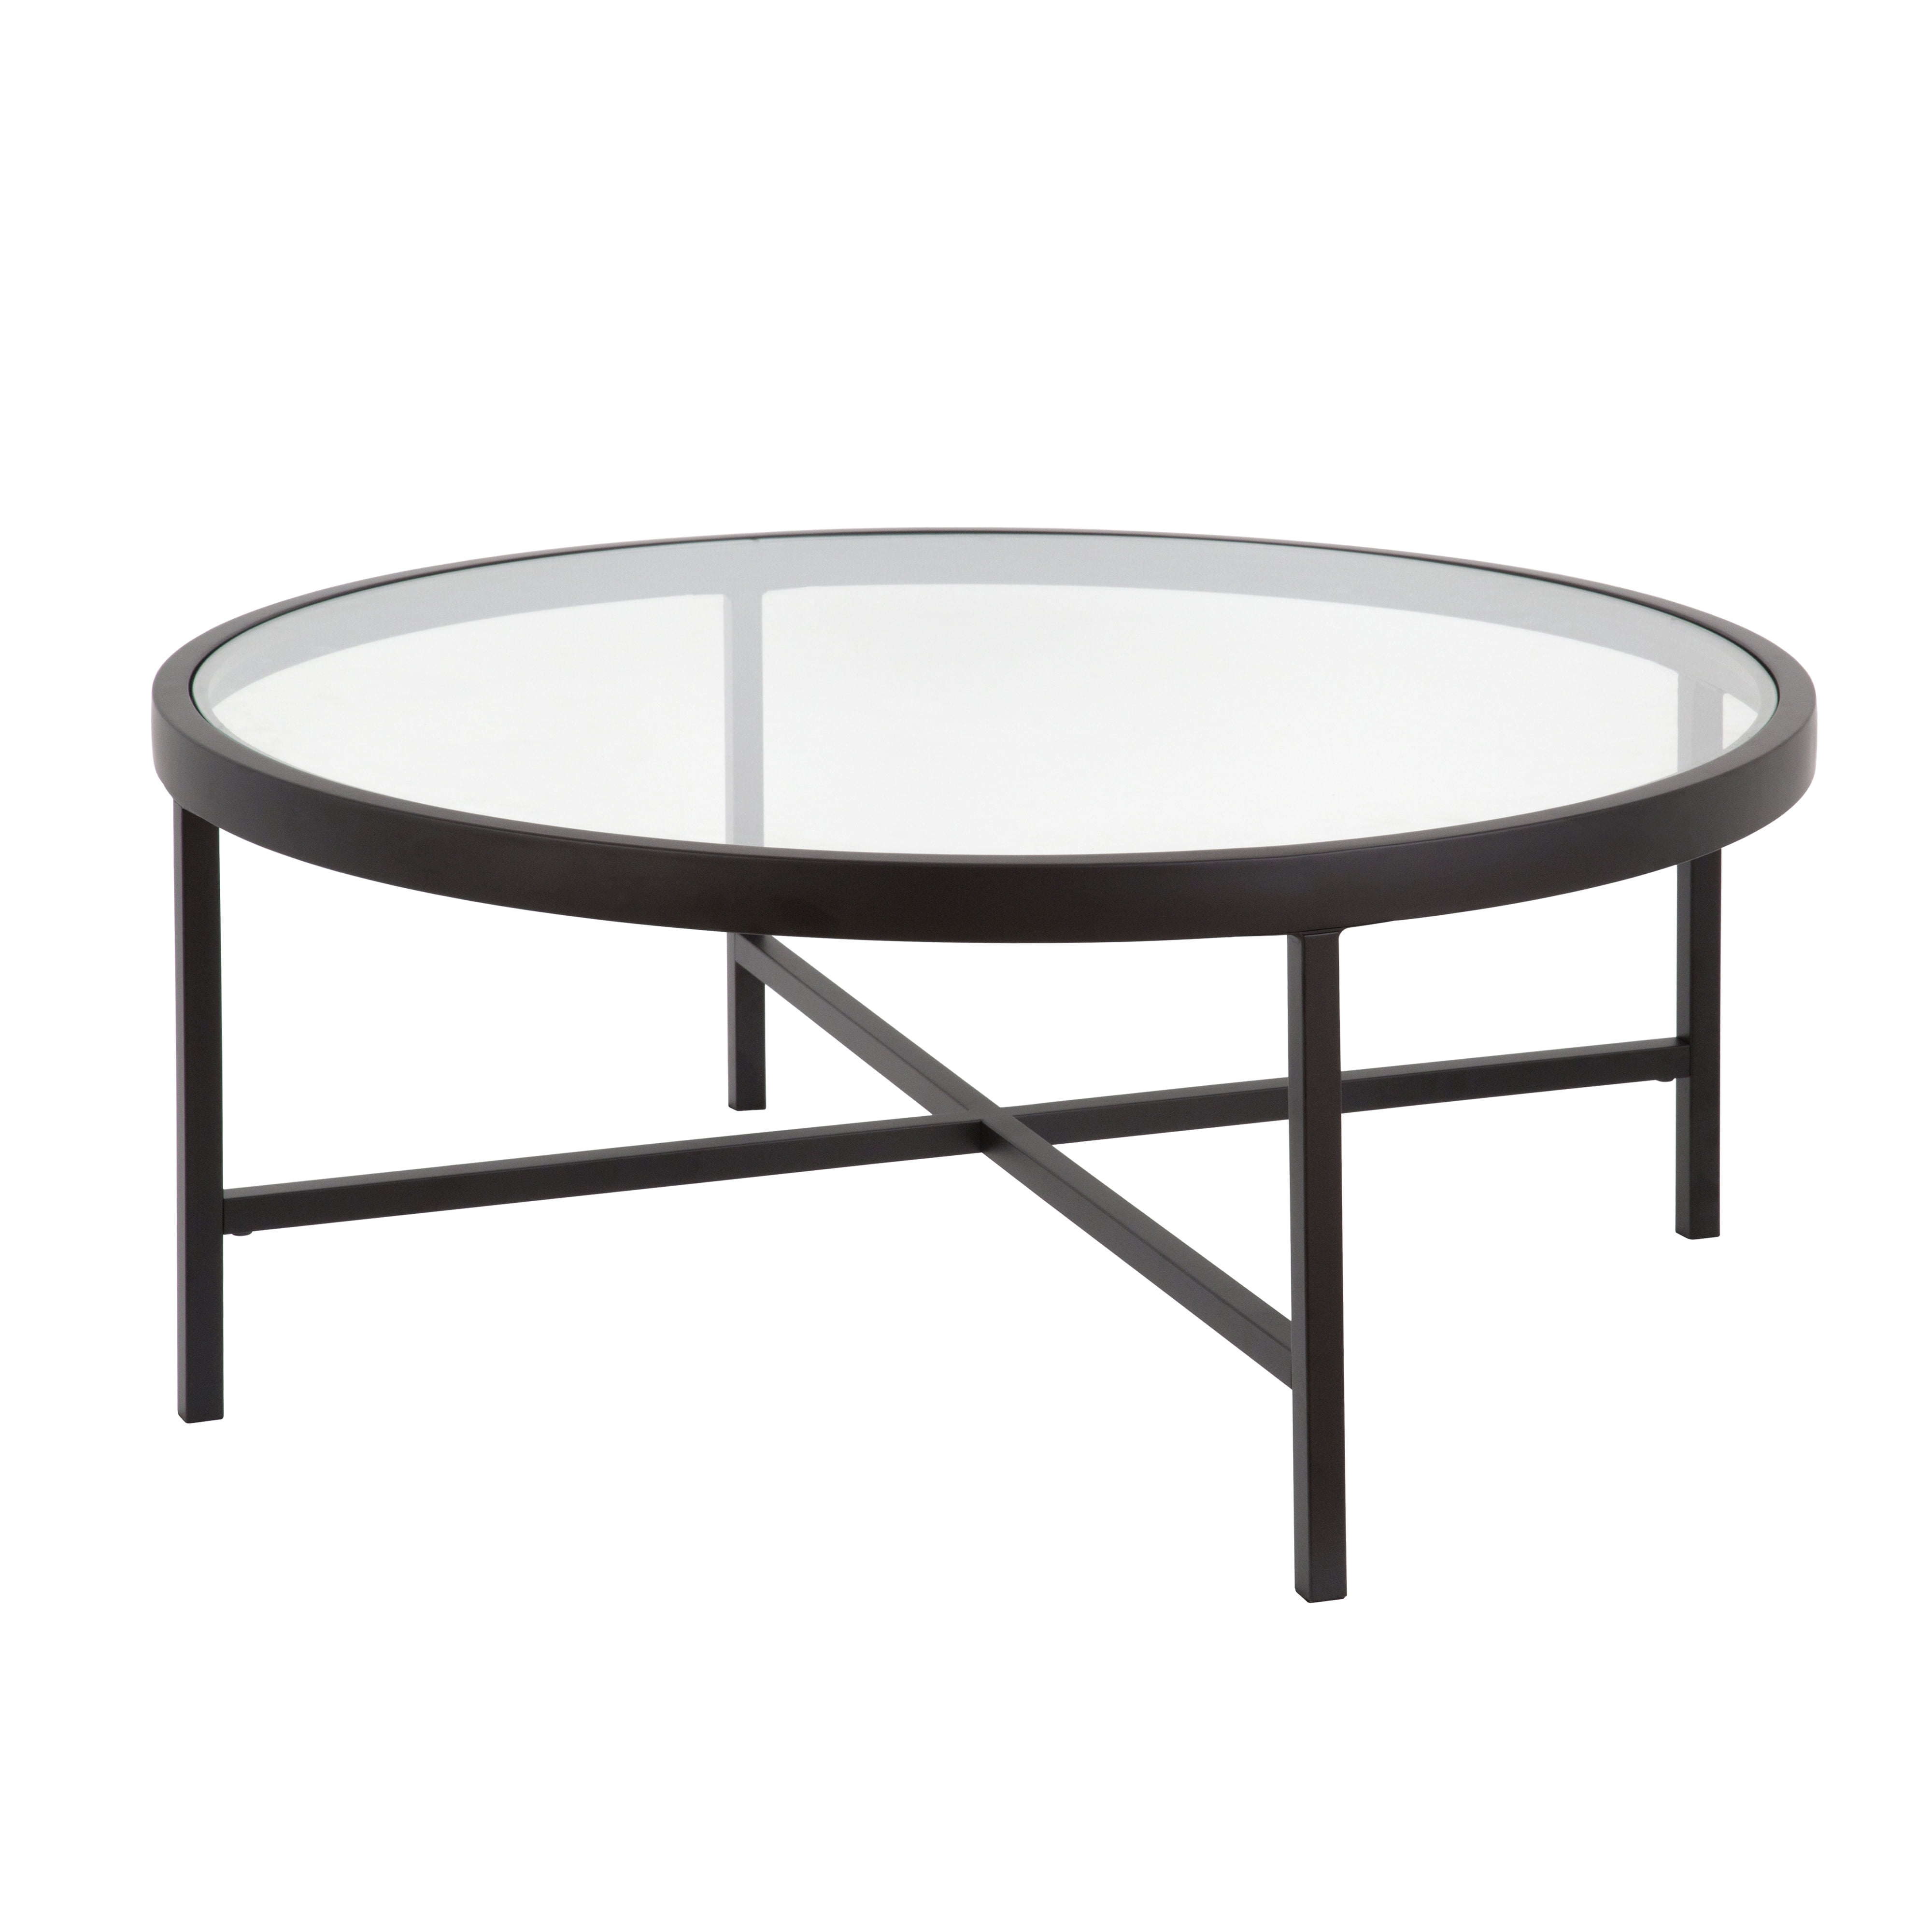 Evelyn Zoe Contemporary Round Coffee, Round Metal Glass Top Coffee Table